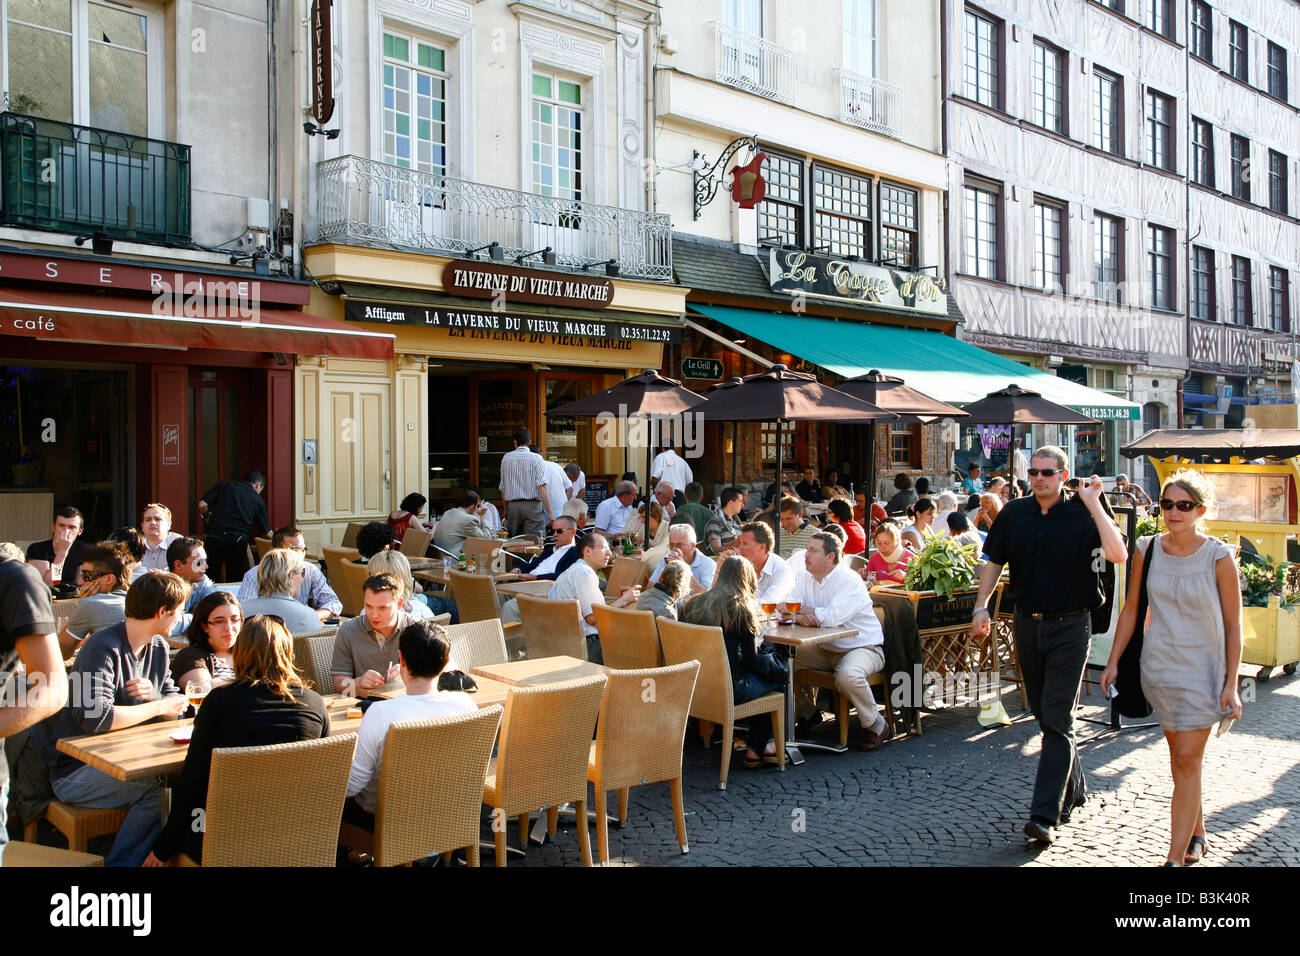 July 2008 - People sitting at an outdoors cafe on Place du Vieux Marche in Rouen Normandy France Stock Photo